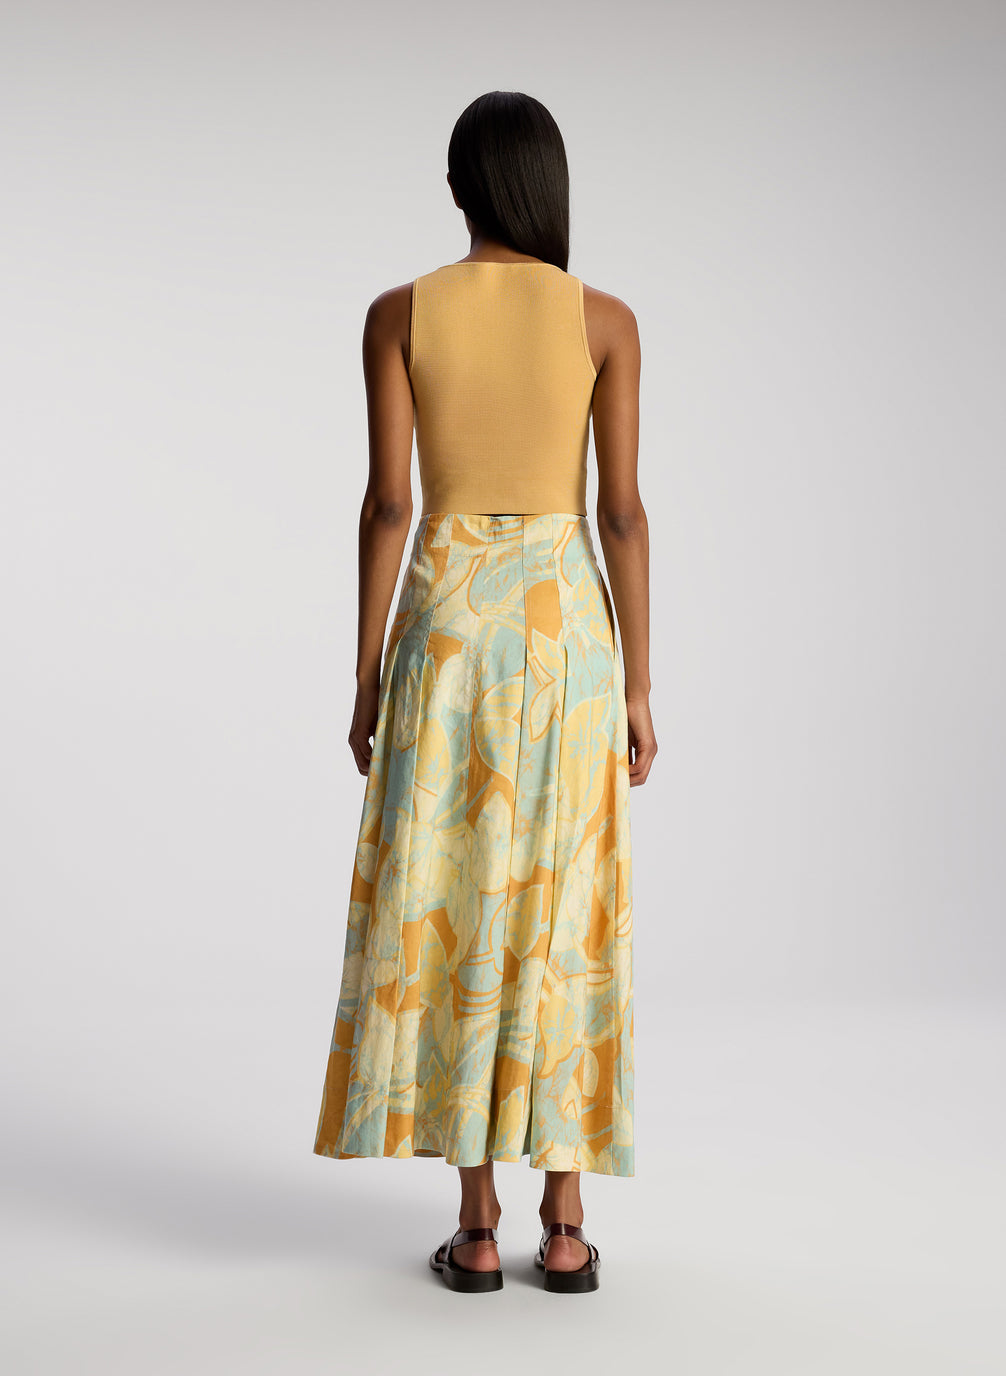 back view of woman wearing tan sleeveless top with multicolor printed midi skirt